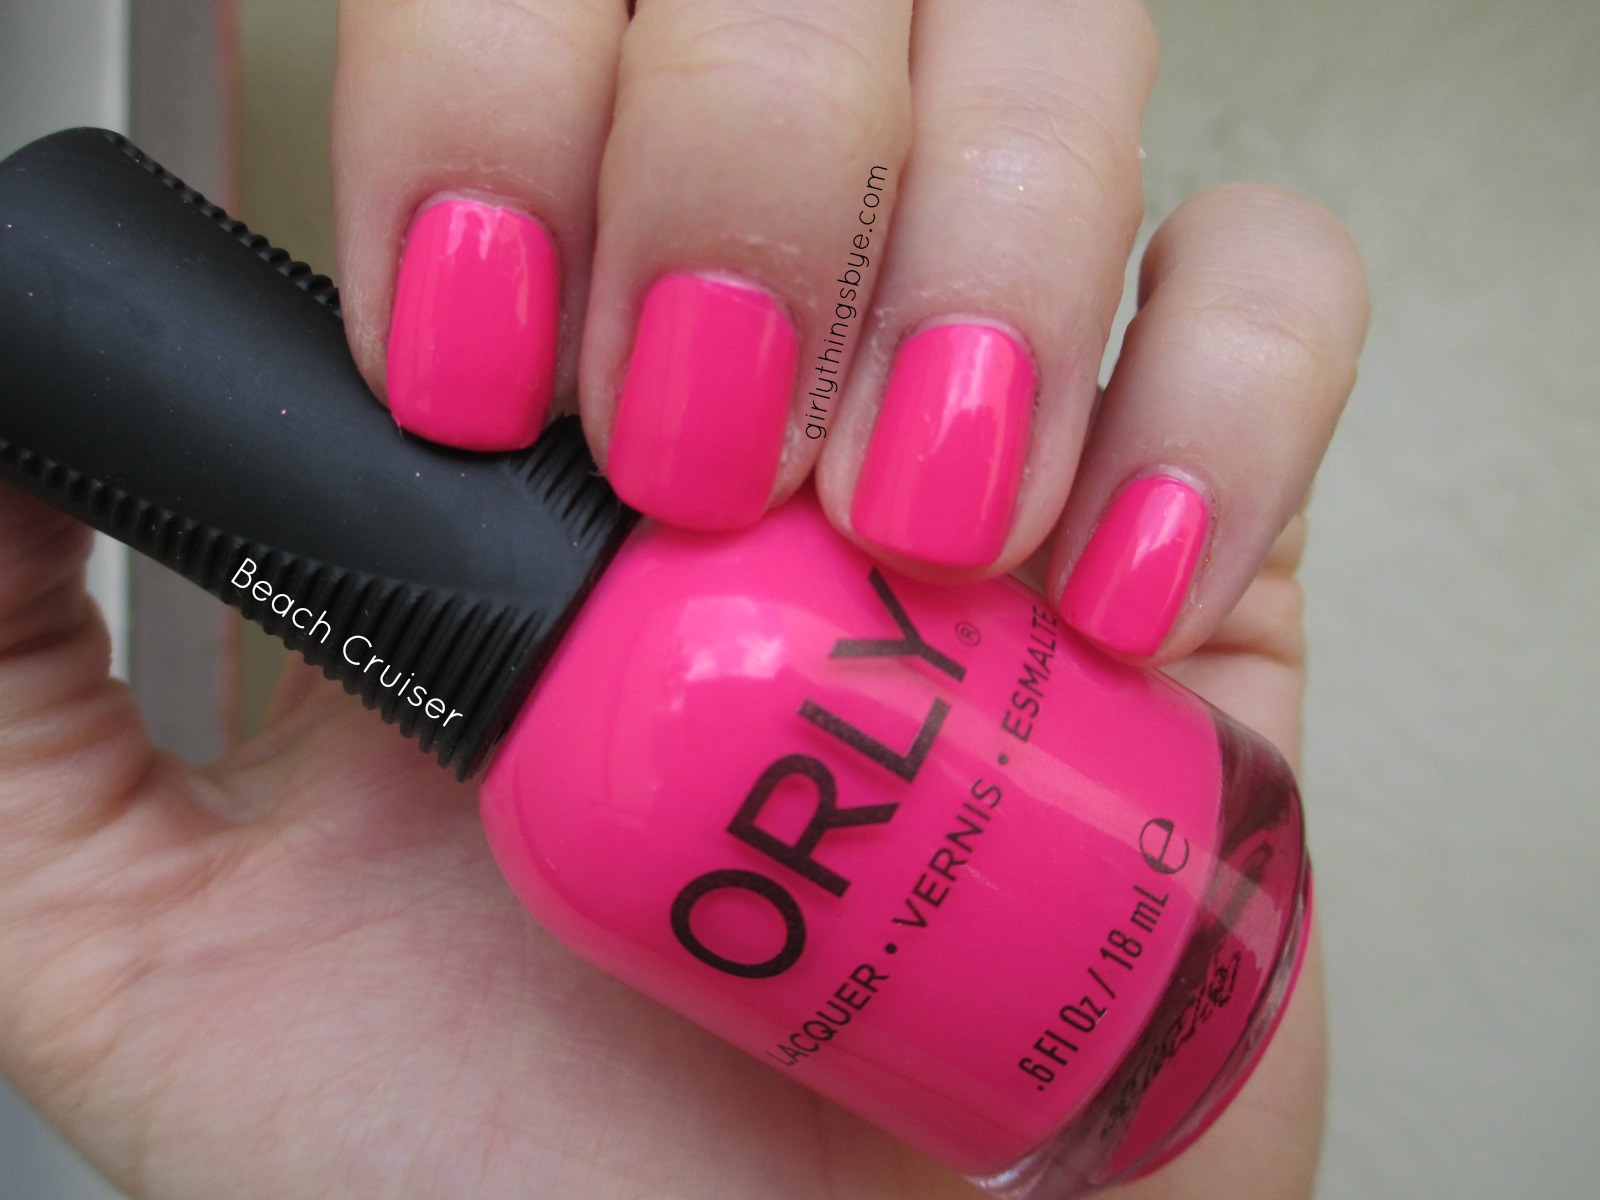 10. Orly Nail Lacquer in "Beach Cruiser" - wide 10